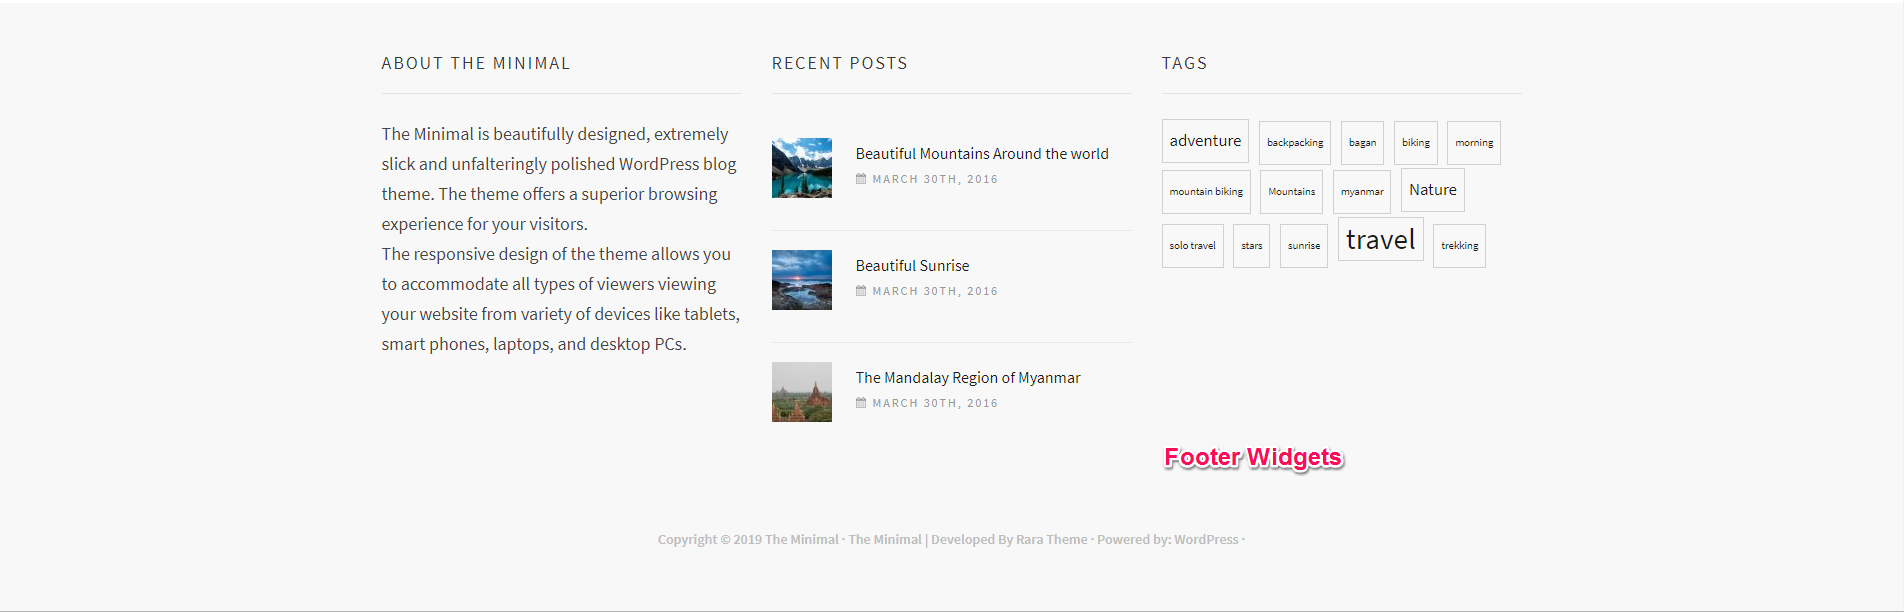 footer widgets for the minimal